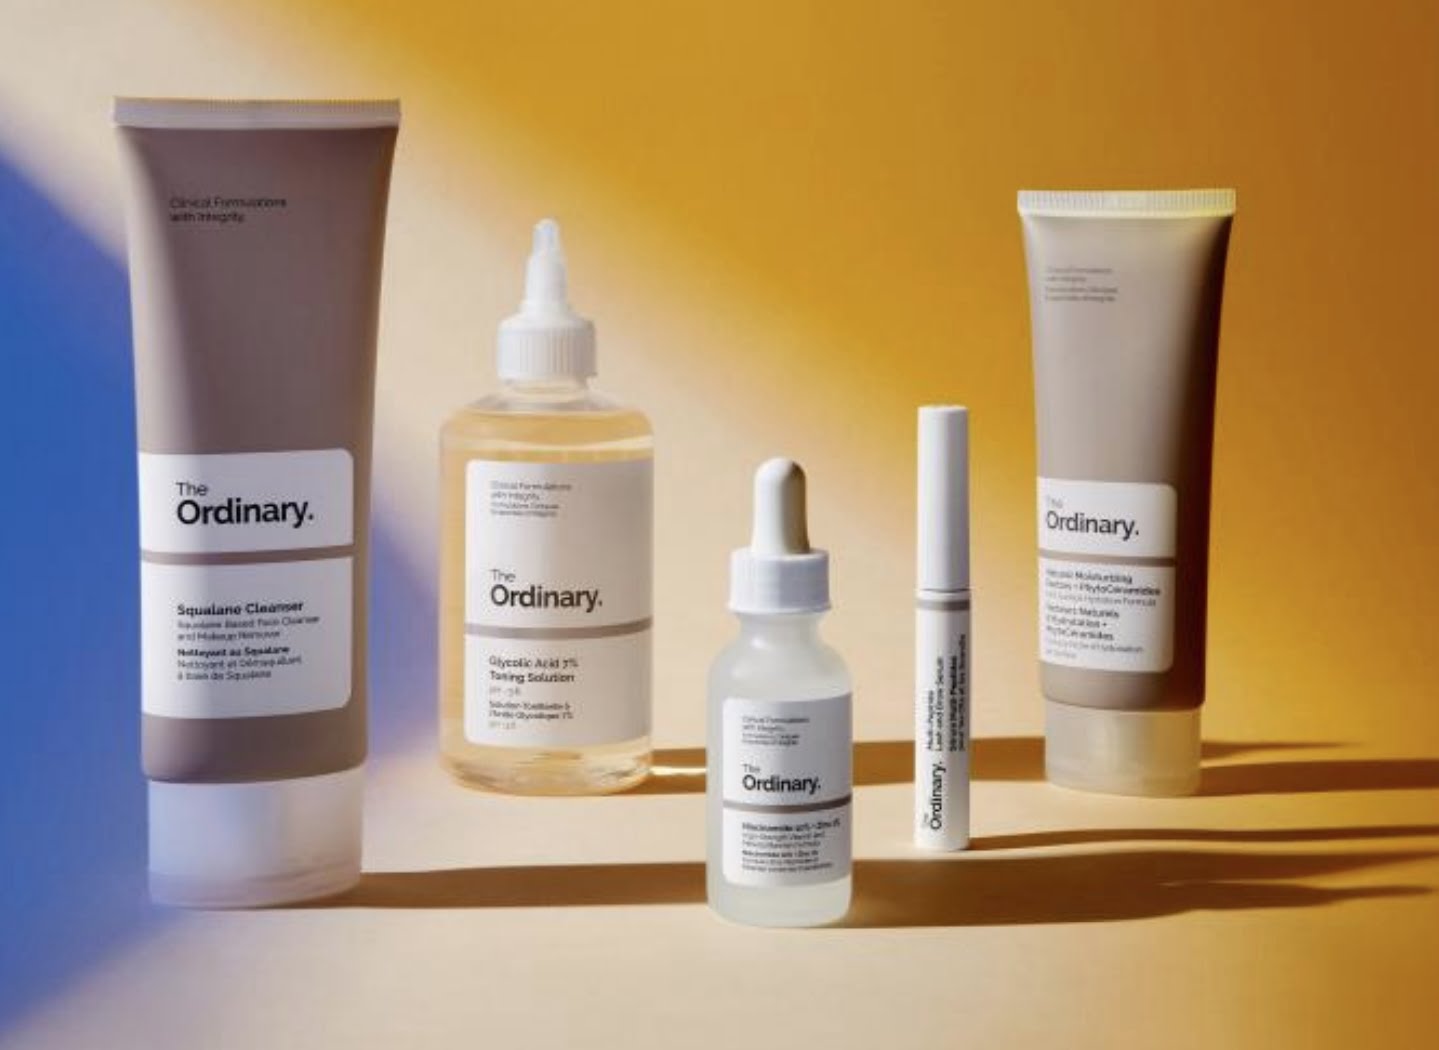 Cult Beauty’s Brand of the Month is The Ordinary: Free shipping + exclusive offers throughout the month